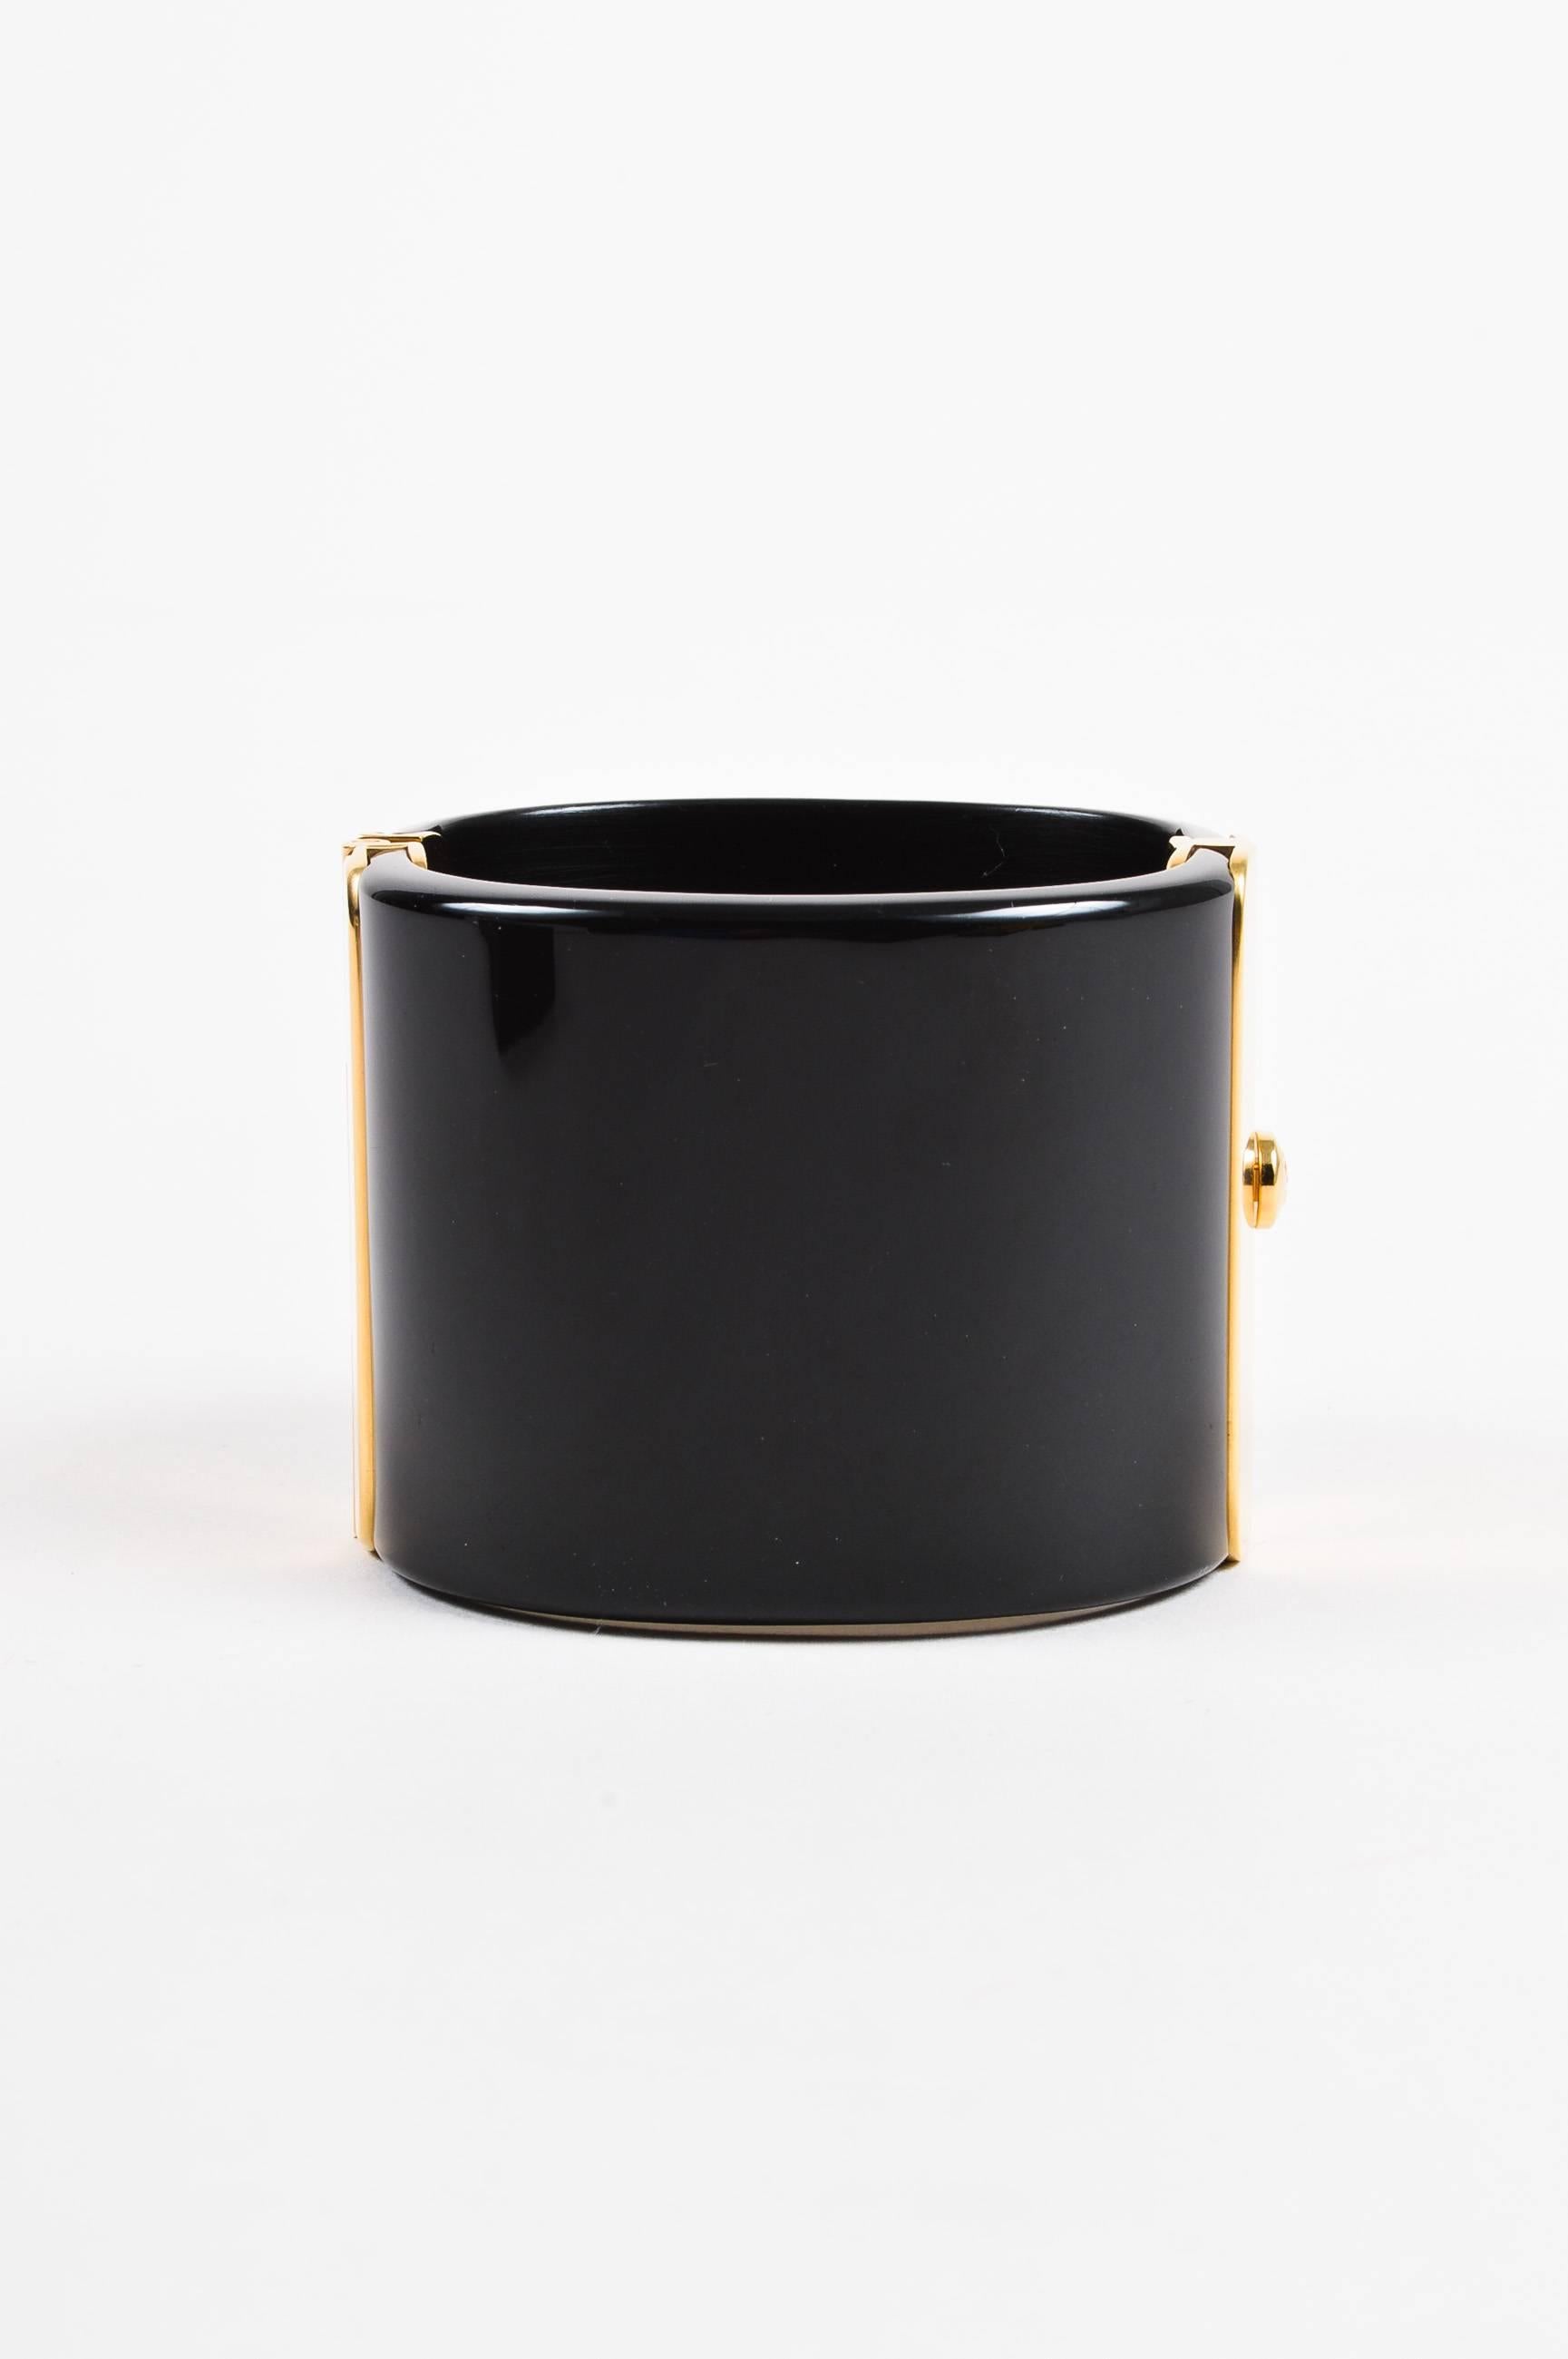 Comes with box and dust bag. Bold statement cuff from Fall 2011 Collection. Black resin wide bangle with ornate gold-tone metal embellished with glittery black and dark red gripoix stones. Ridged 'CC' logo at center stone. Oval opening. Push lock